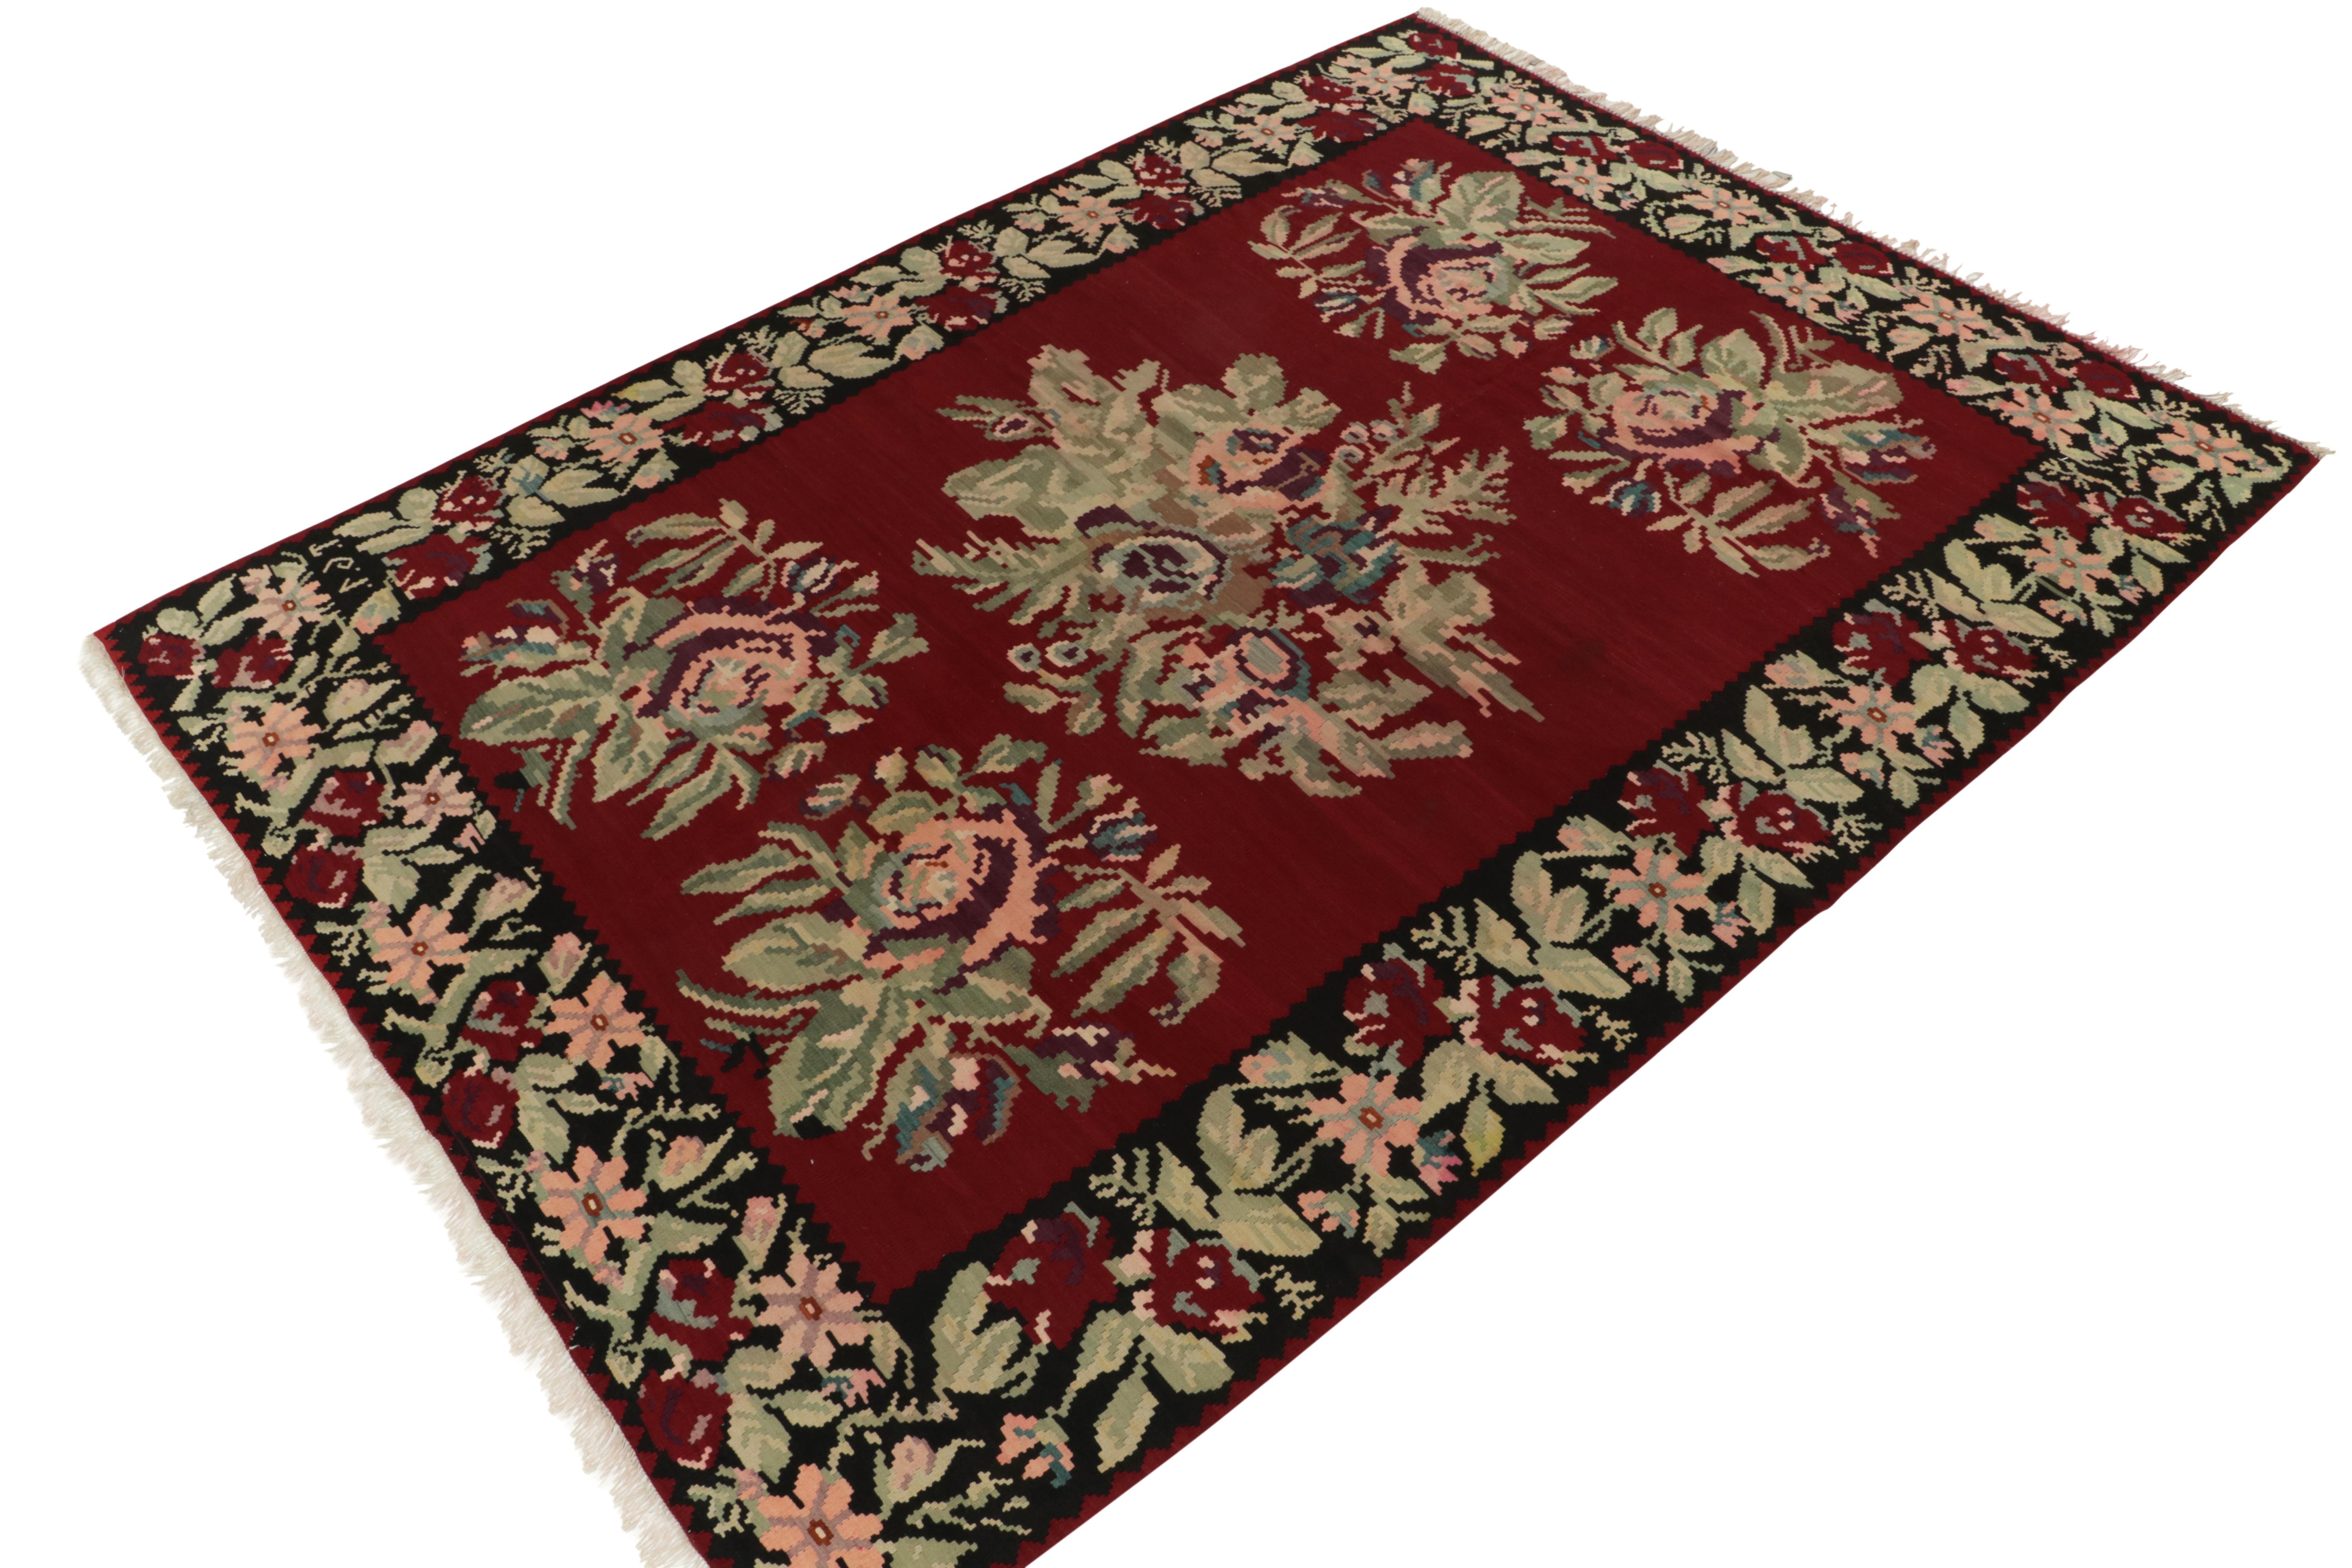 Handwoven in wool circa 1950-1960, a rare 9x12 vintage Kilim believed to be of Bessarabian provenance. 

On the Design: This grand work seems to exemplify those of its lineage while subtly innovating the style to a keen eye. The rich red plays